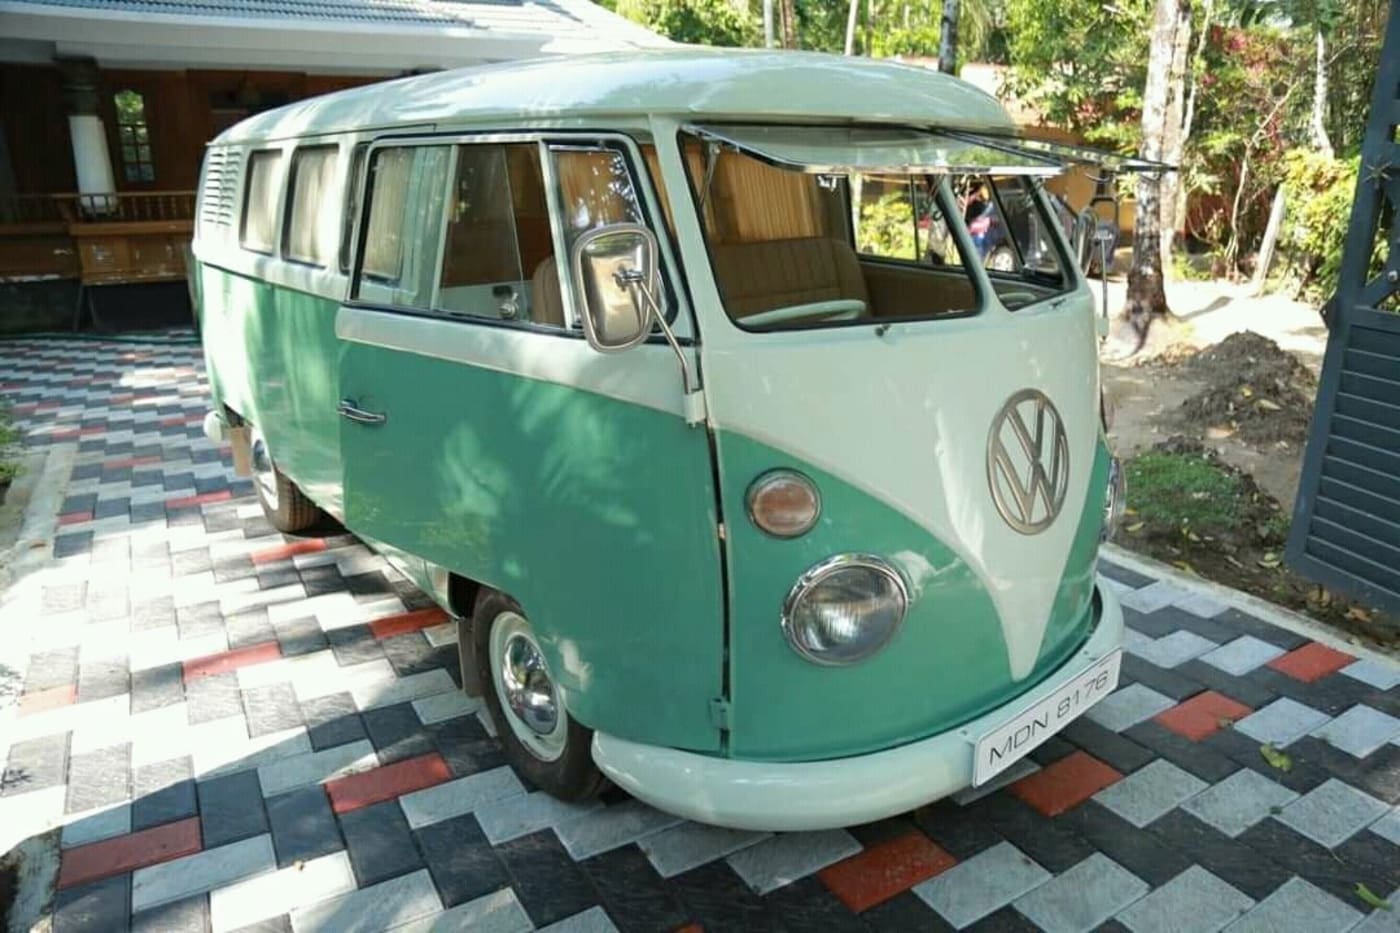 This Volkswagen Kombi Is A Classic Van Restored To Its Former Glory